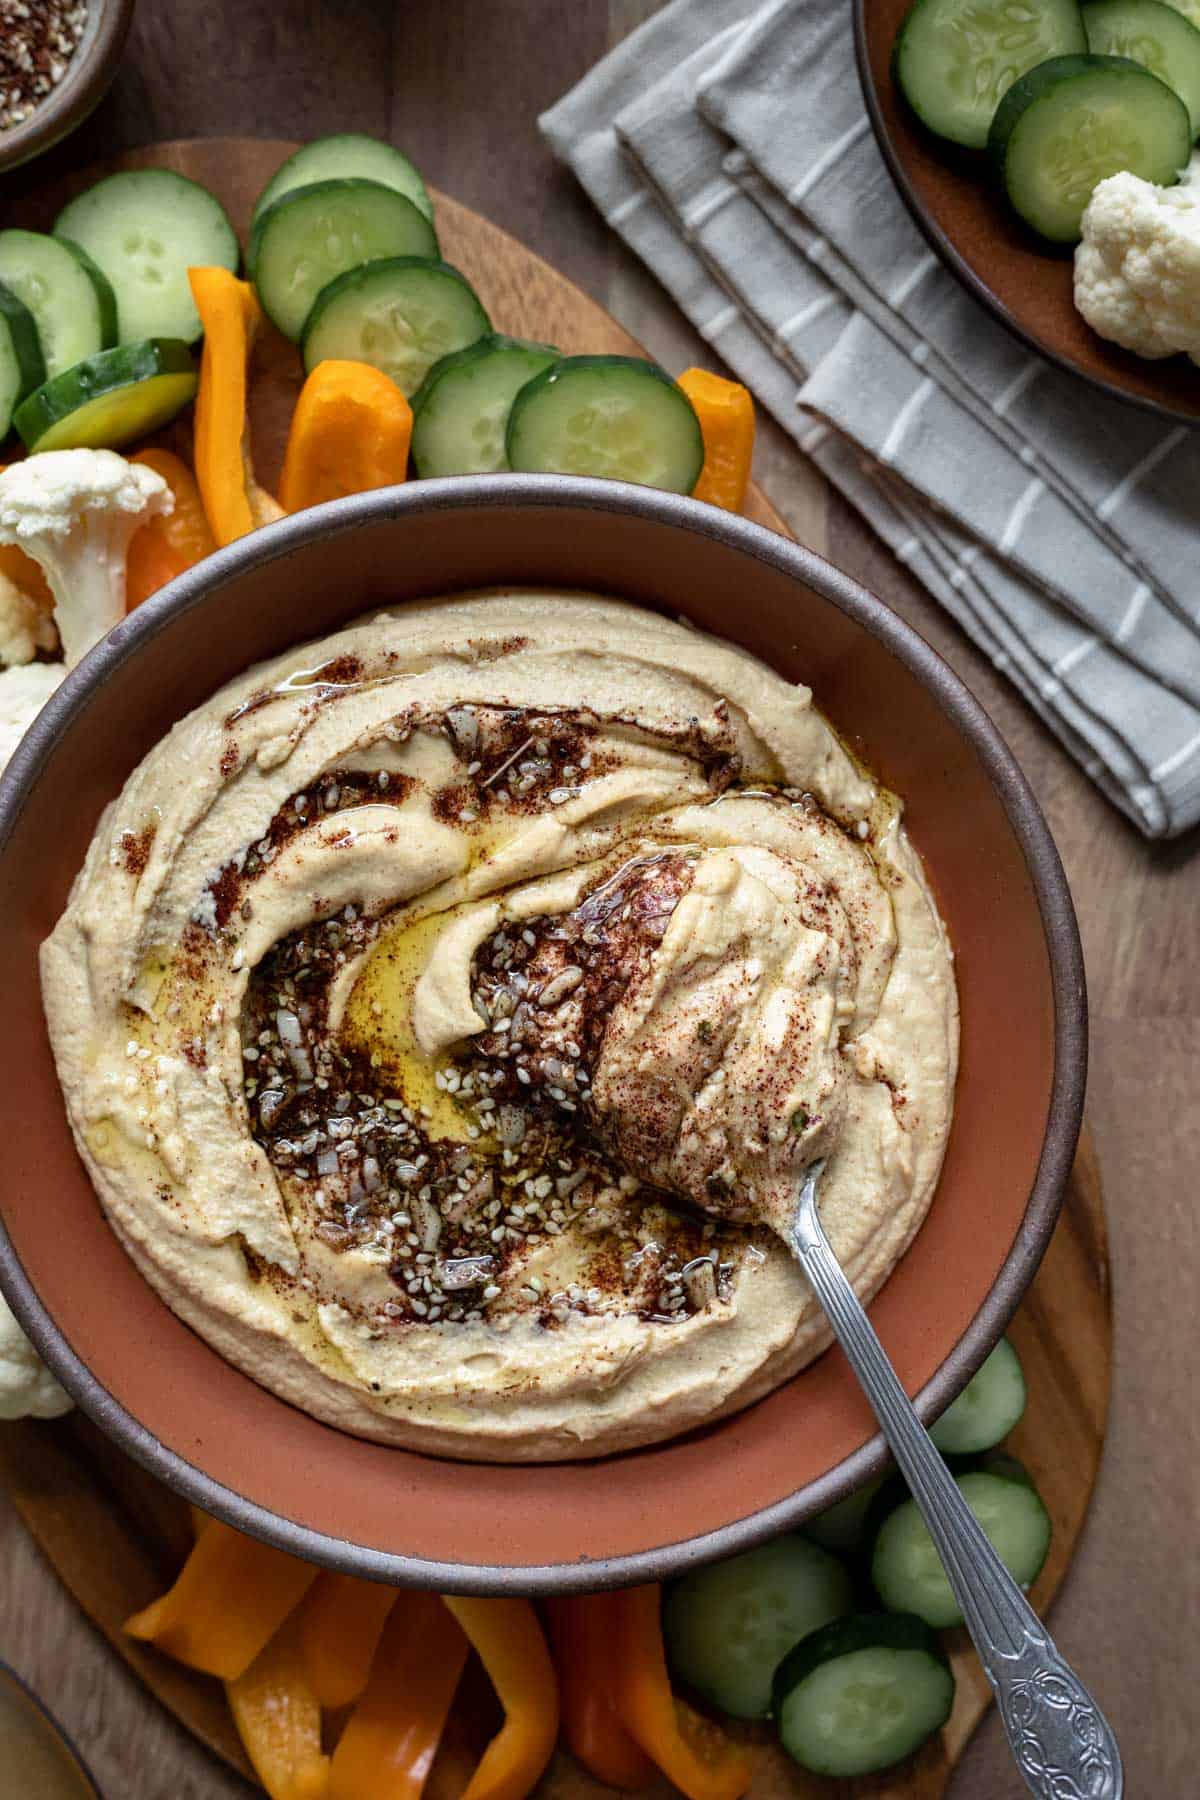 creamy hummus topped with a swirl of za'atar and garlic infused oil on a platter surrounded by raw vegetables.